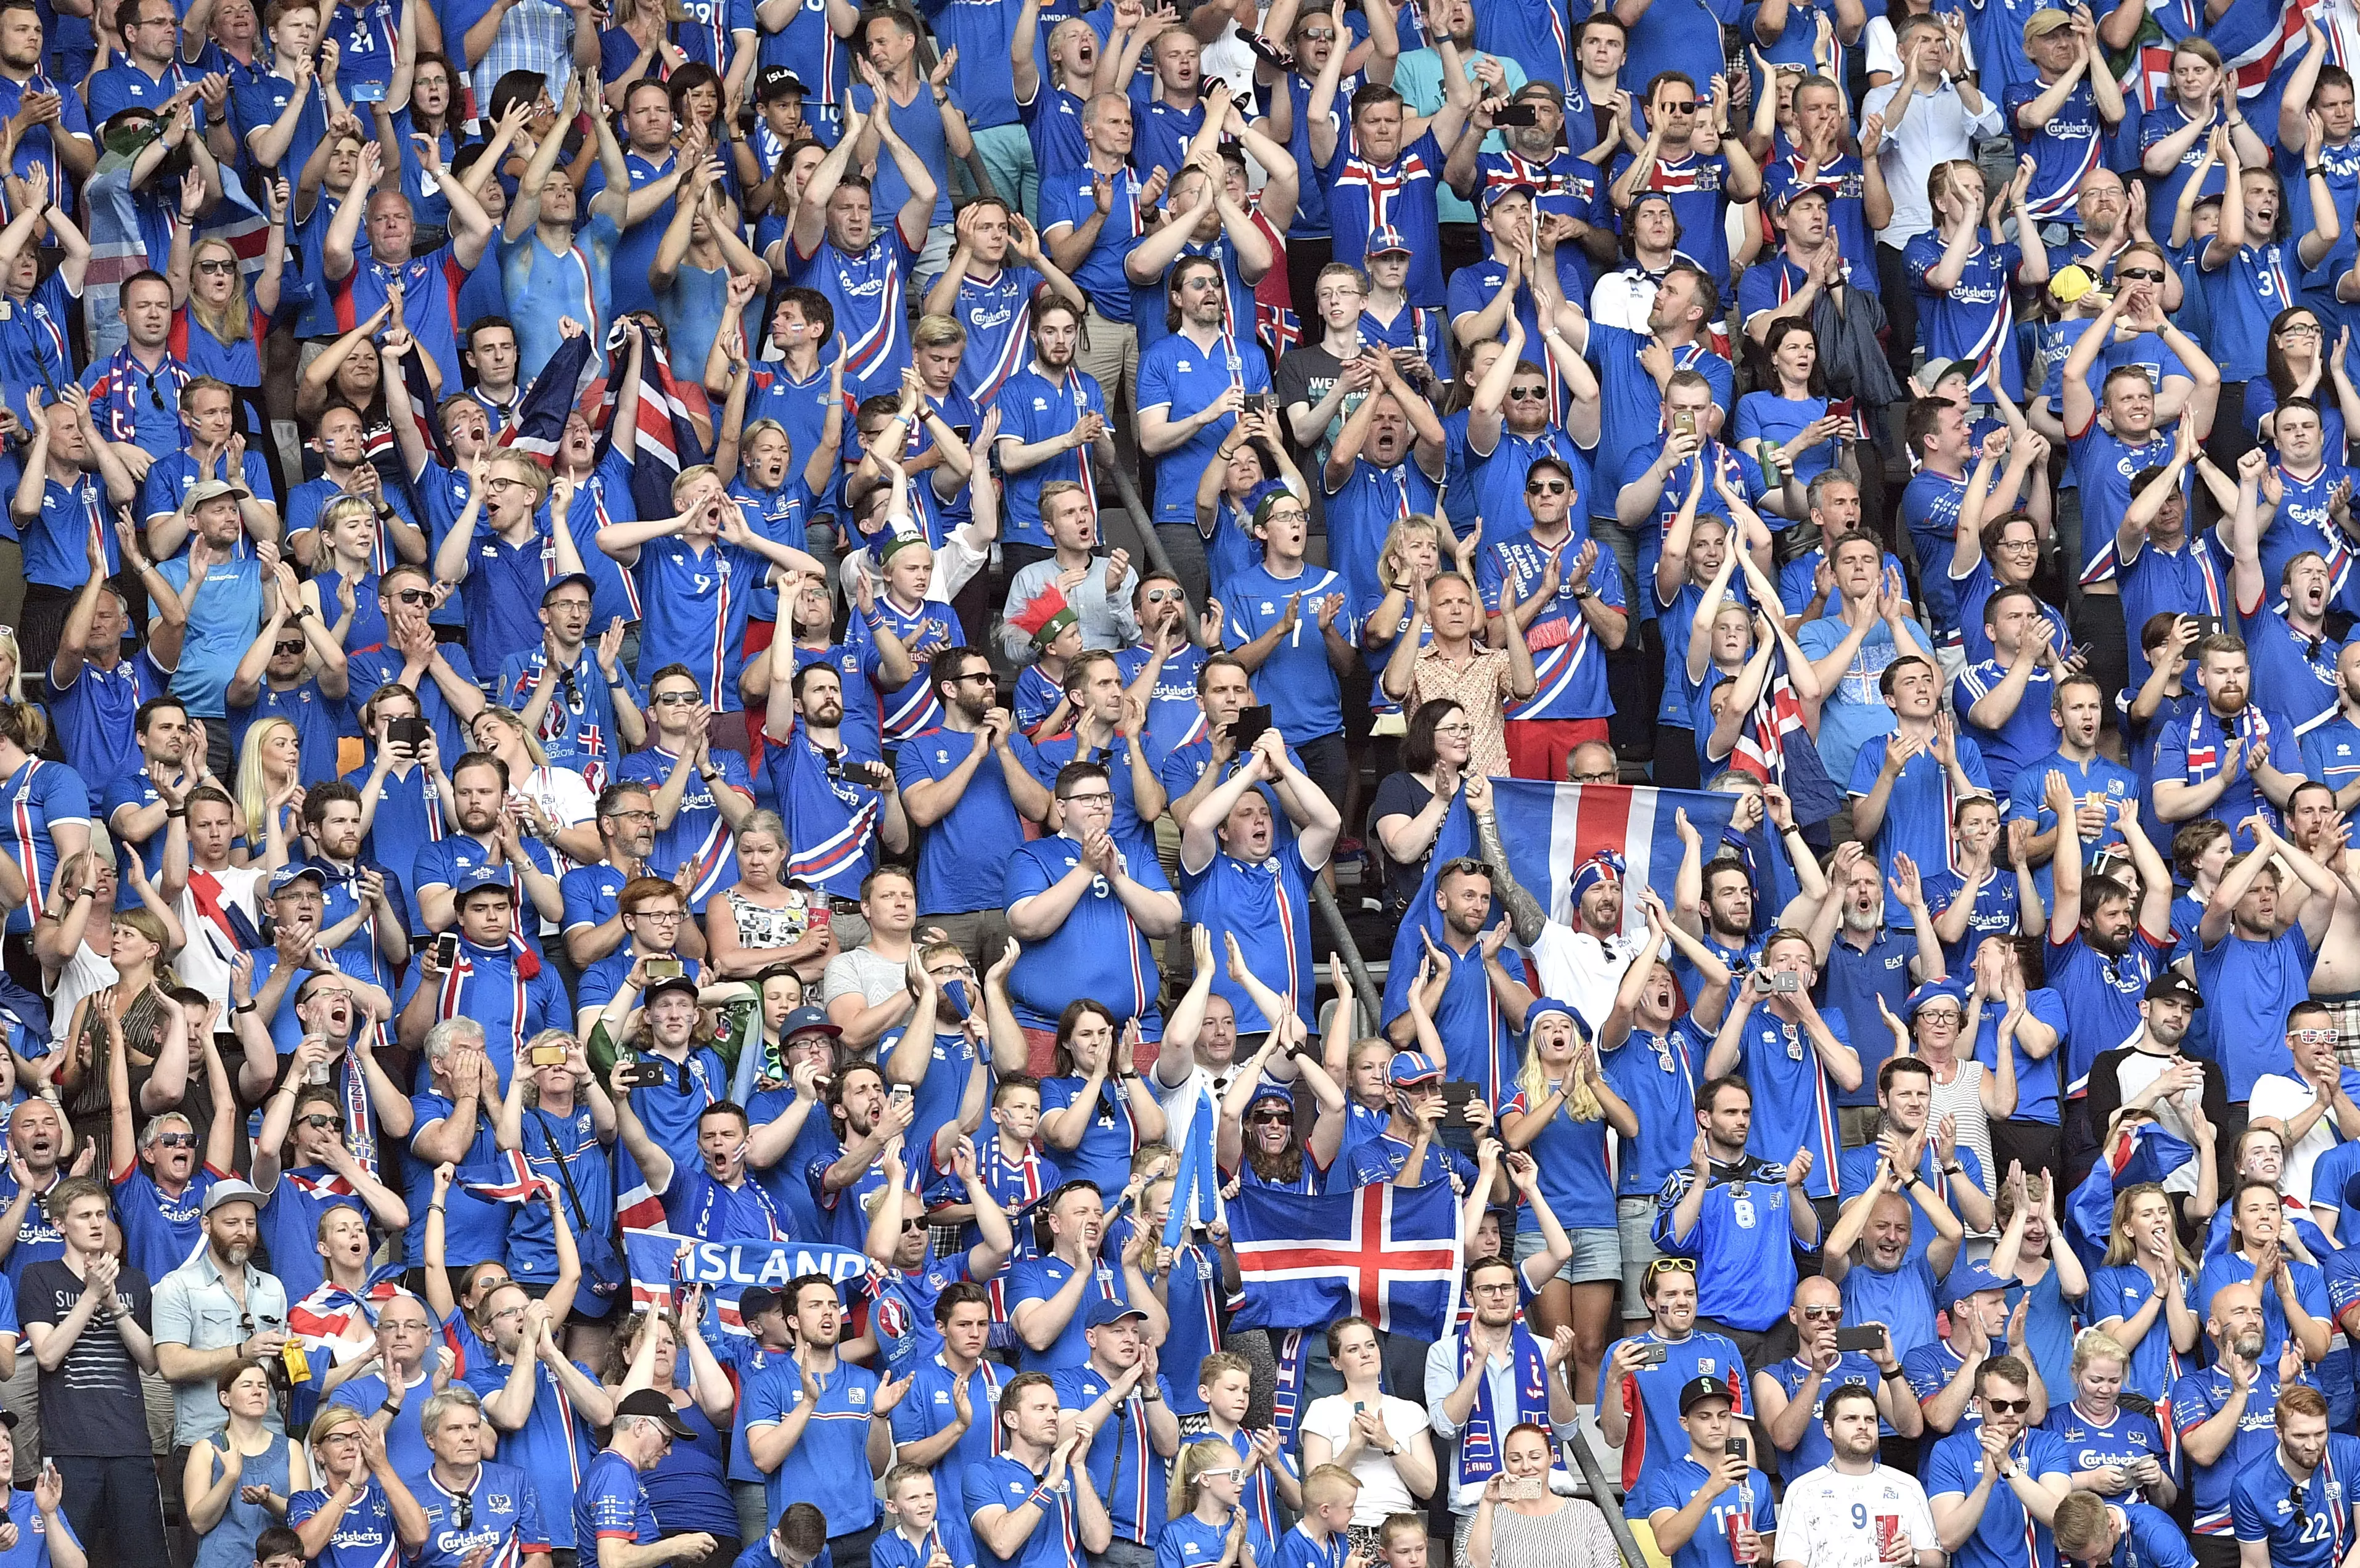 Iceland Shirt Sales Up 1800% After Euro 2016 Group Success 